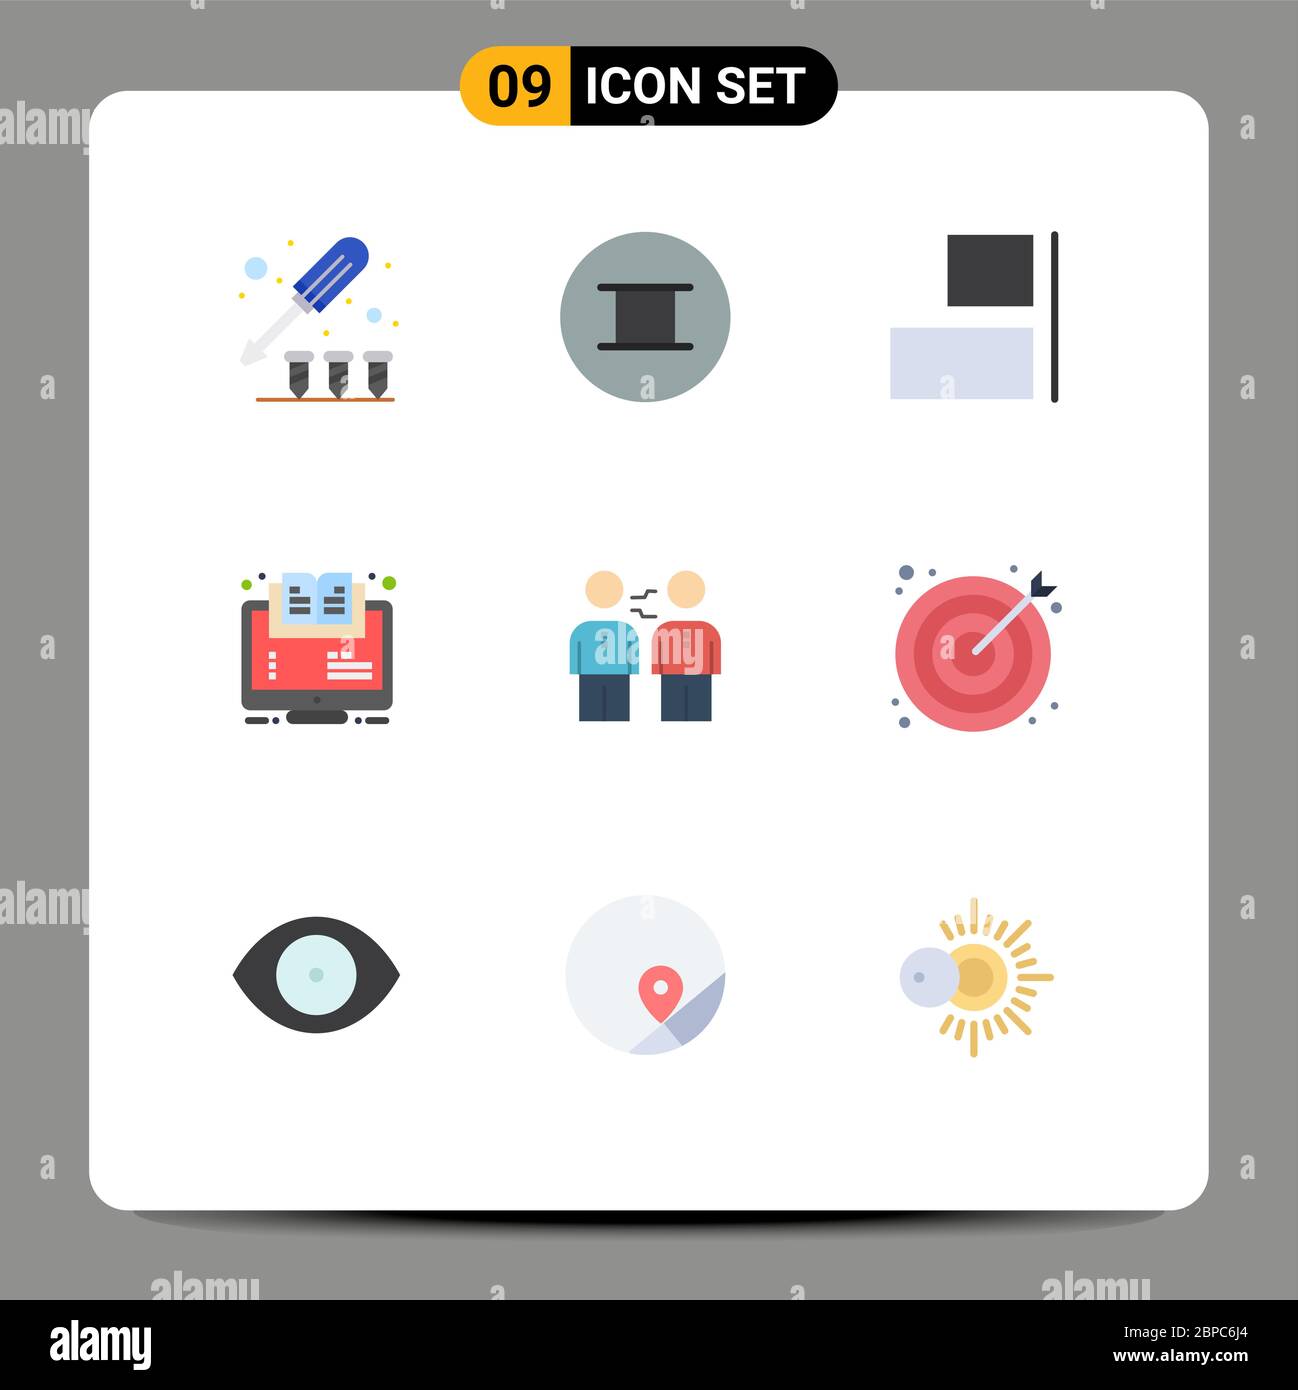 Pictogram Set of 9 Simple Flat Colors of agreement, course, horizontal, online, learning Editable Vector Design Elements Stock Vector